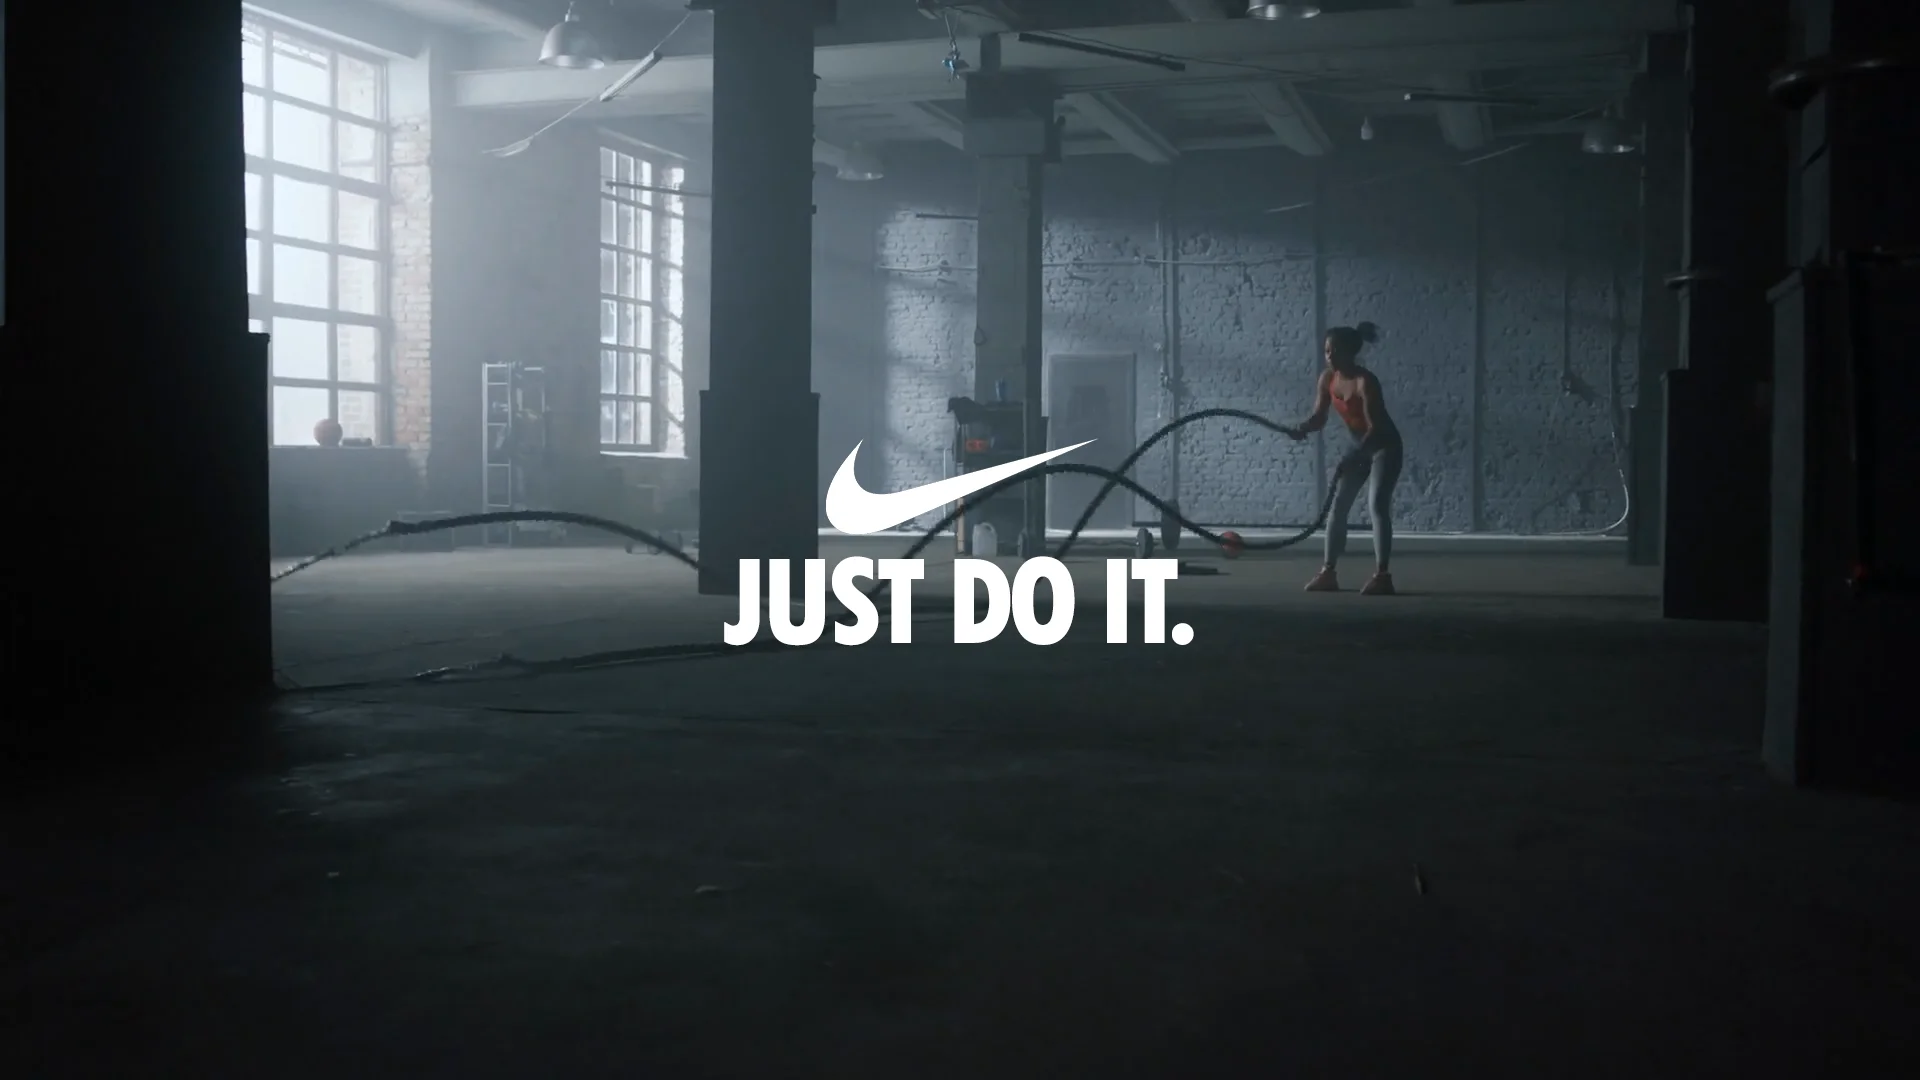 Commercial | Nike: Just Do It - Spec Ad (2022)